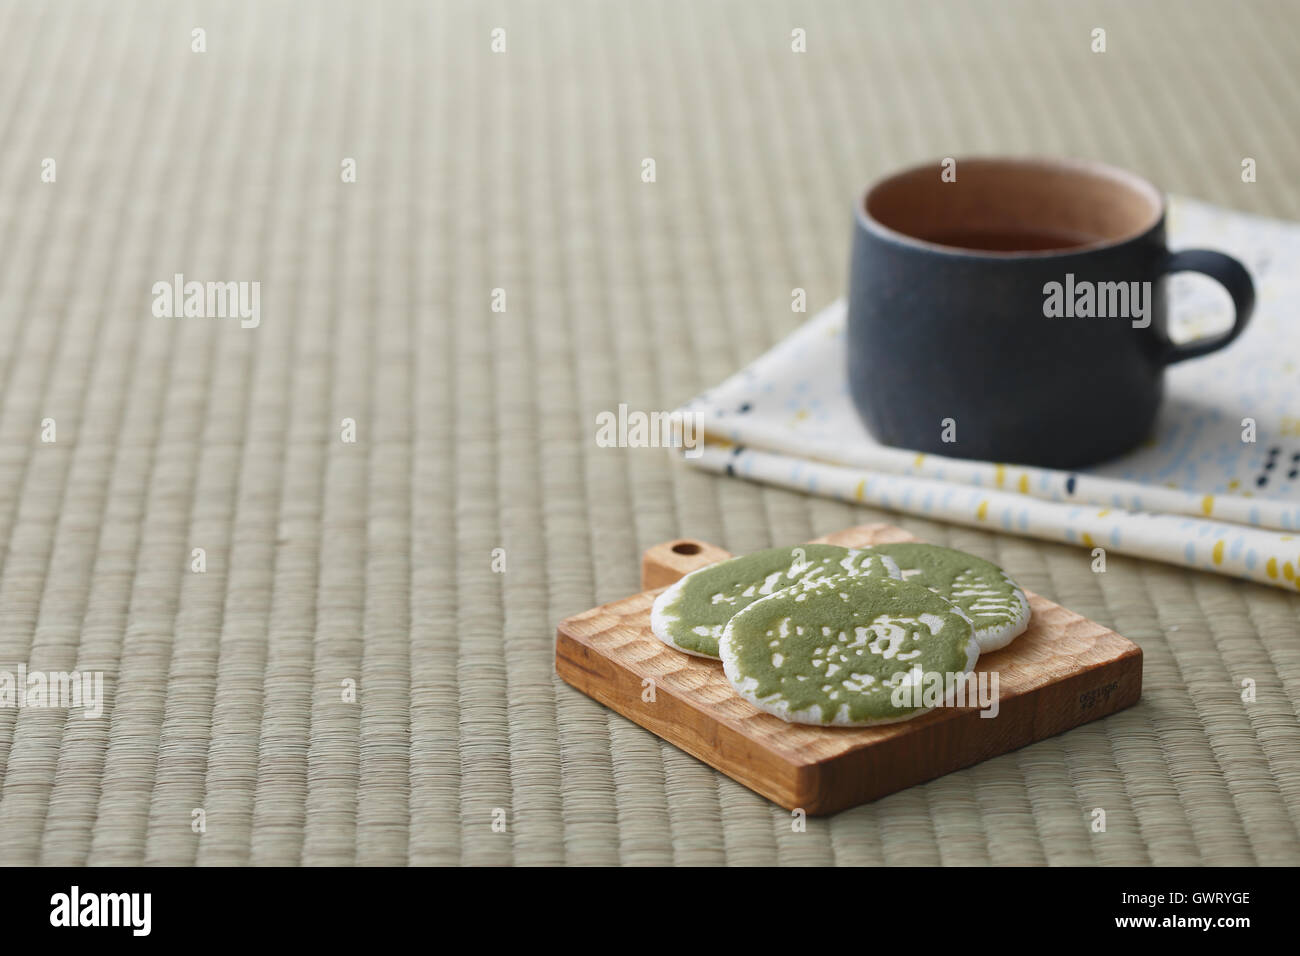 Tea and Japanese pastry Stock Photo